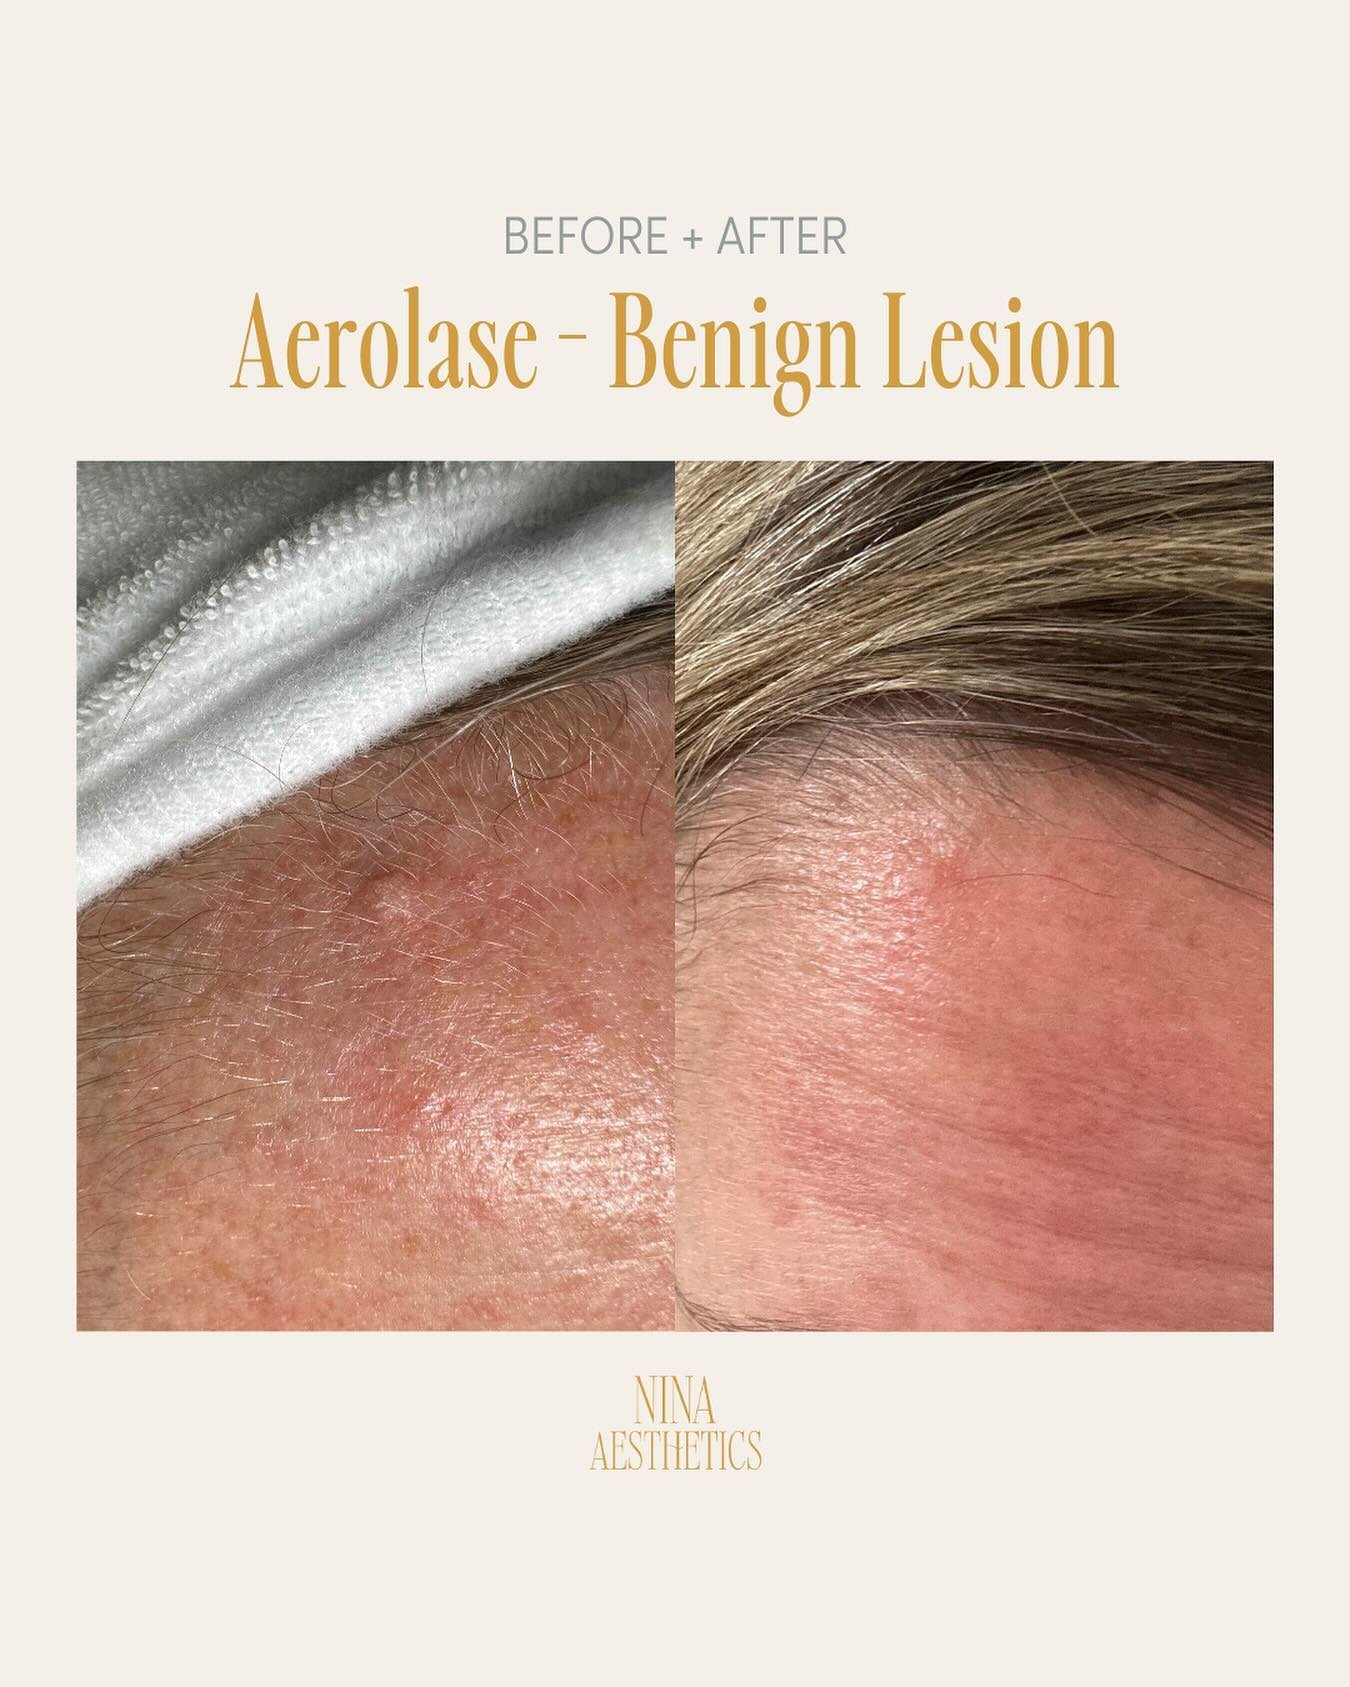 What can&rsquo;t #aerolase do?

Here we used the Aerolase laser to treat a benign lesion and you can really see the difference! If you have any, and I mean ANY skin condition you&rsquo;d like resolved, shoot us a message and ask us about Aerolase. Wh